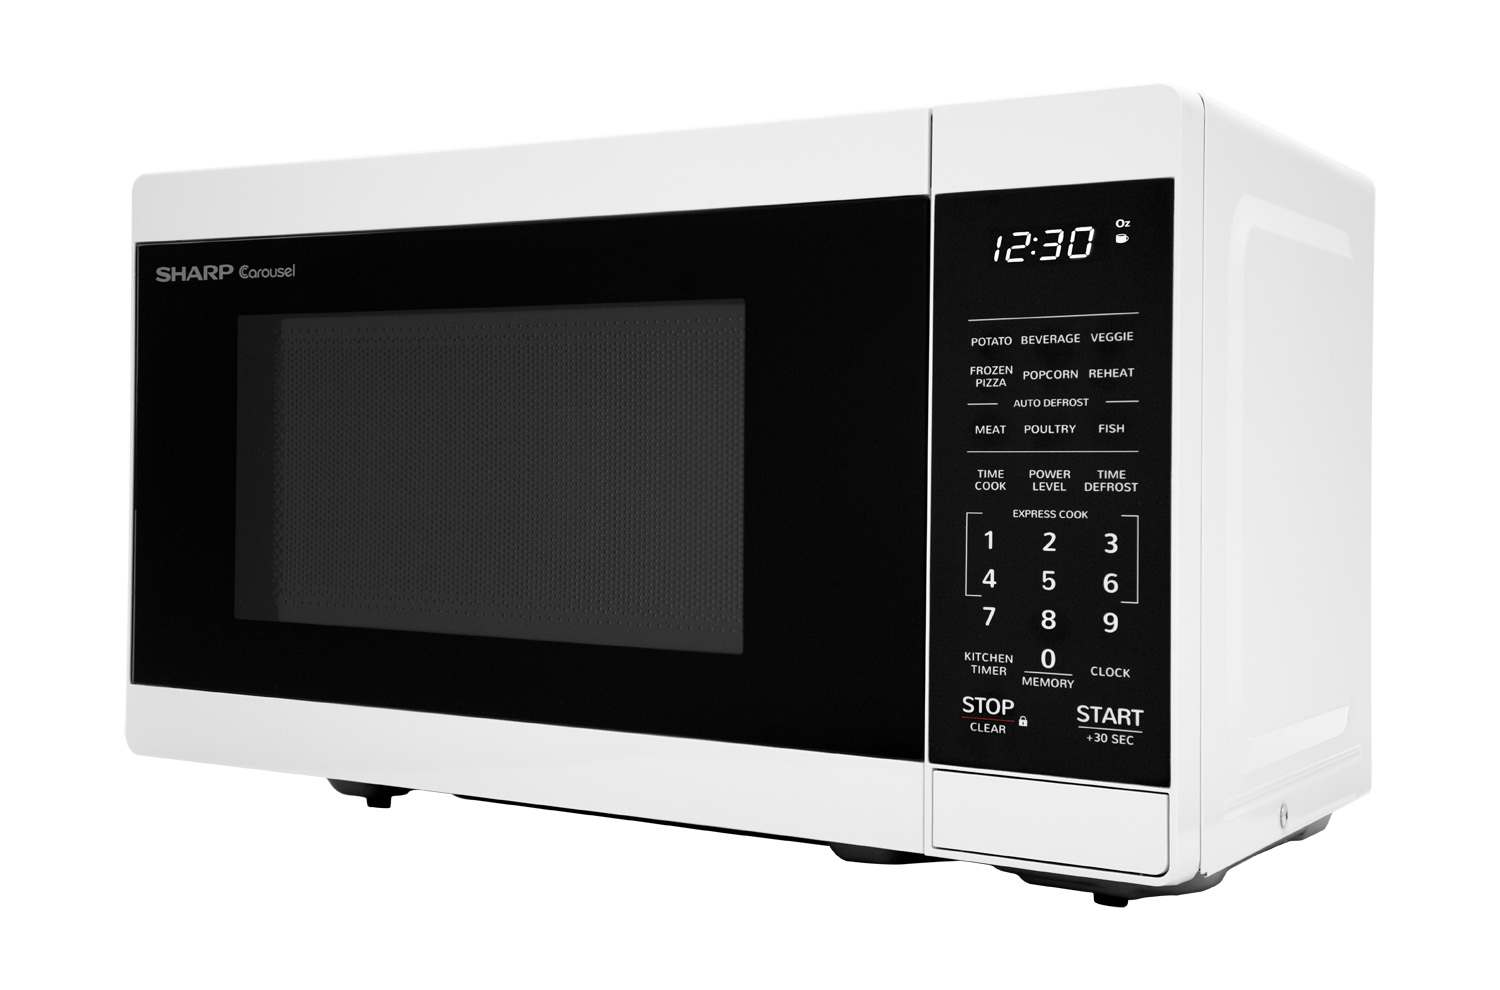 0.7 Cu ft Compact Countertop Microwave Oven, White 17.60 x 12.70 x 9.60  Inches